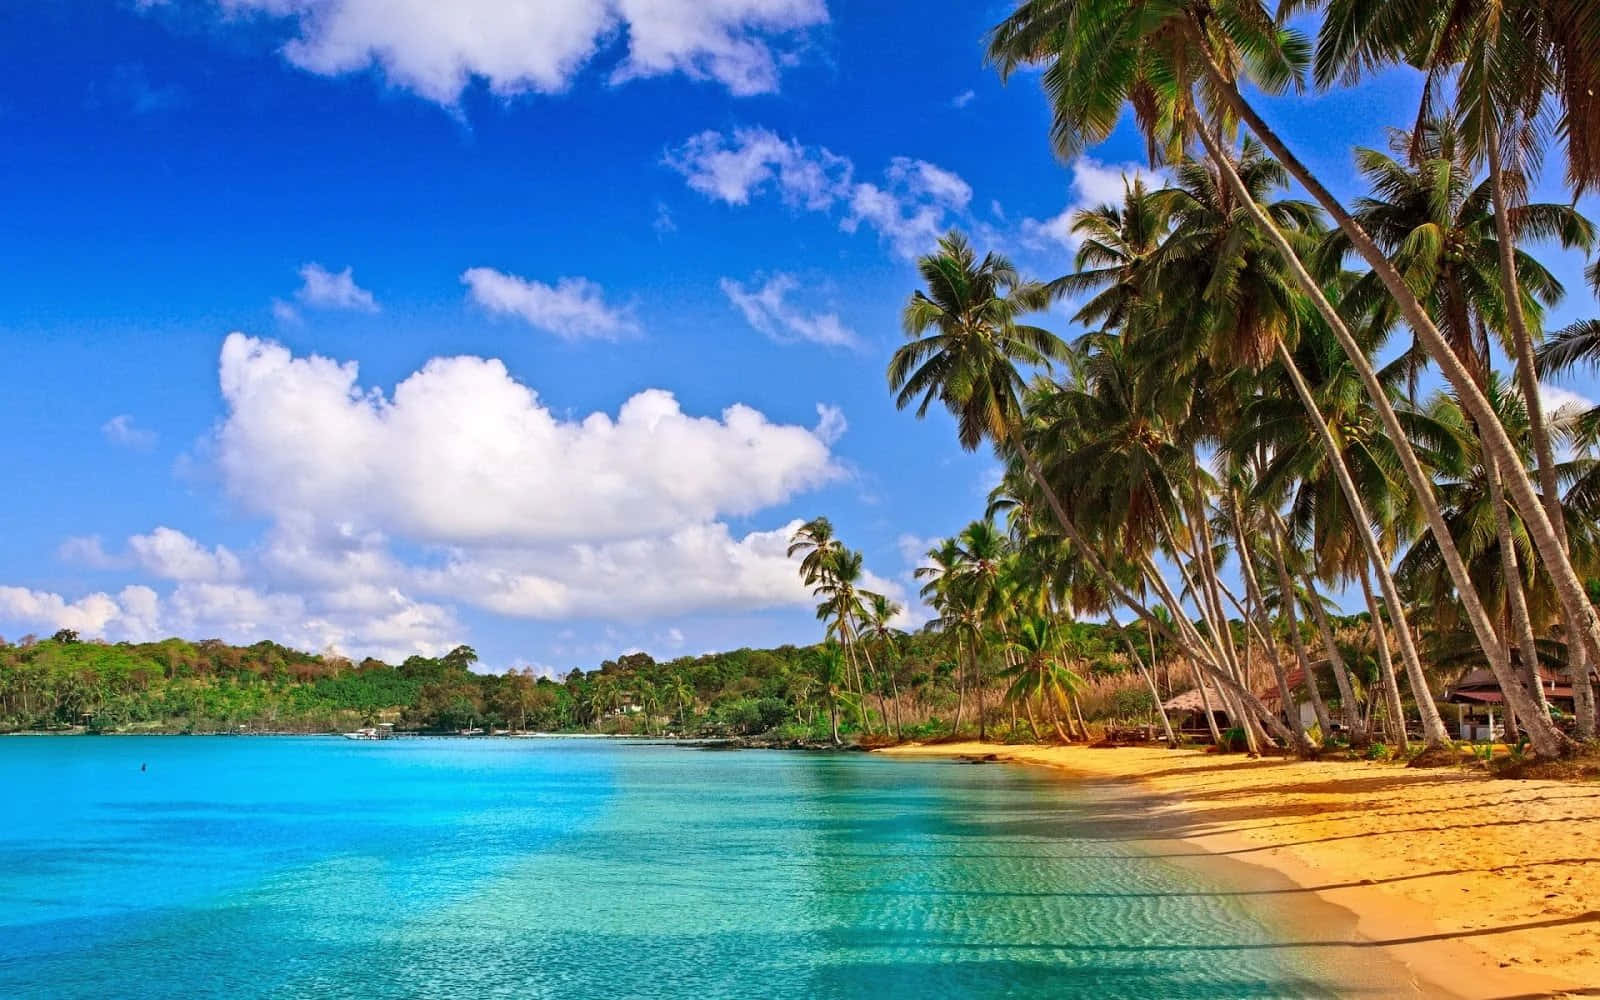 Enjoy the beautiful golden sands and tropical blue waters of Goa Beach.